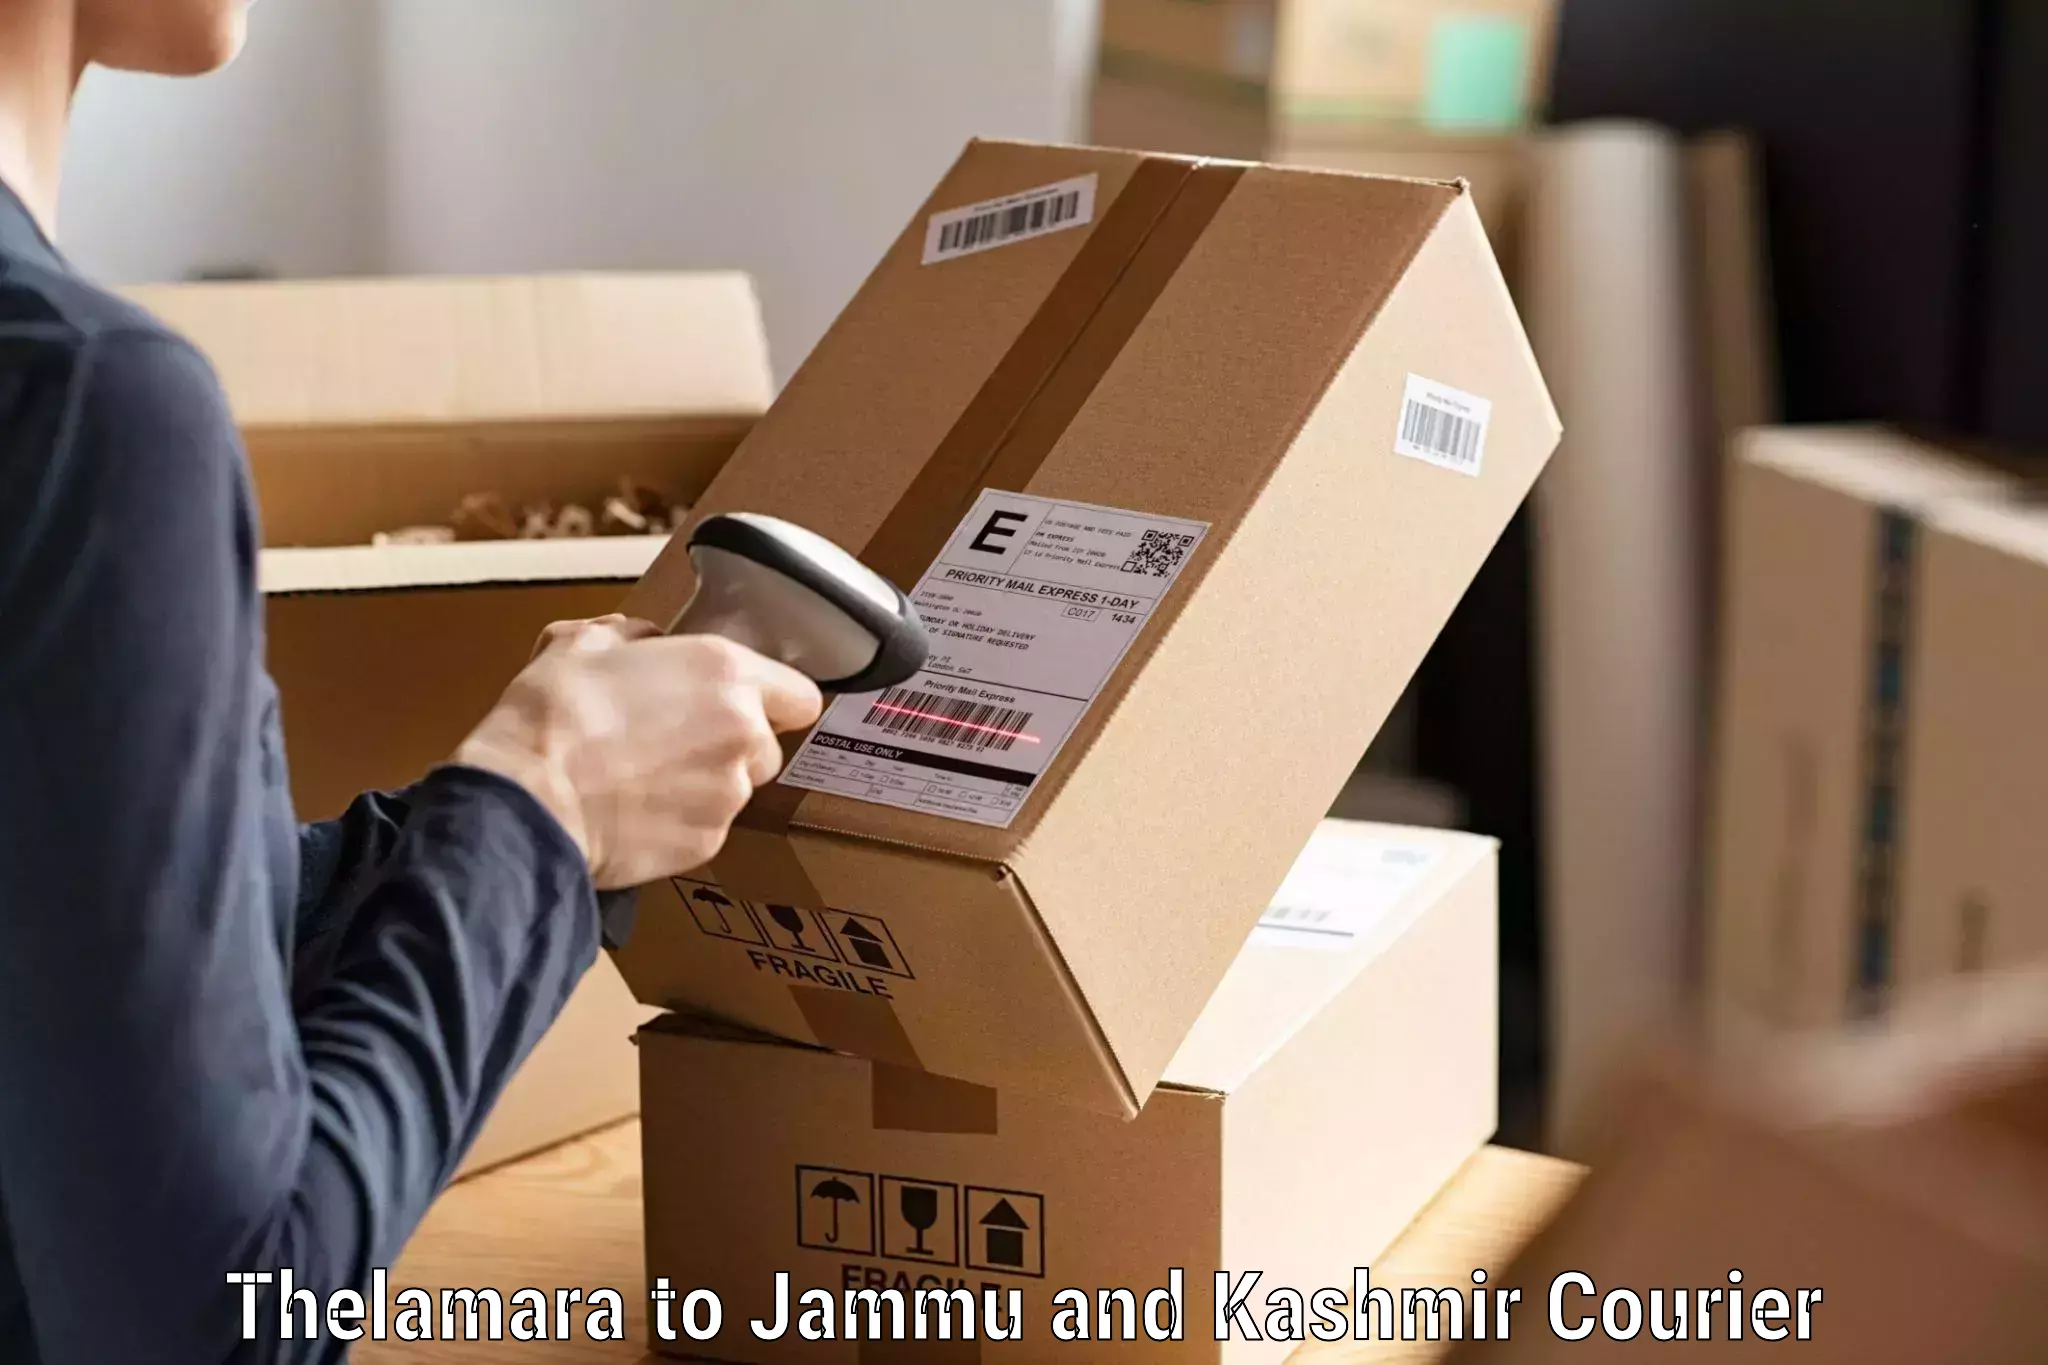 Easy return solutions in Thelamara to Jammu and Kashmir